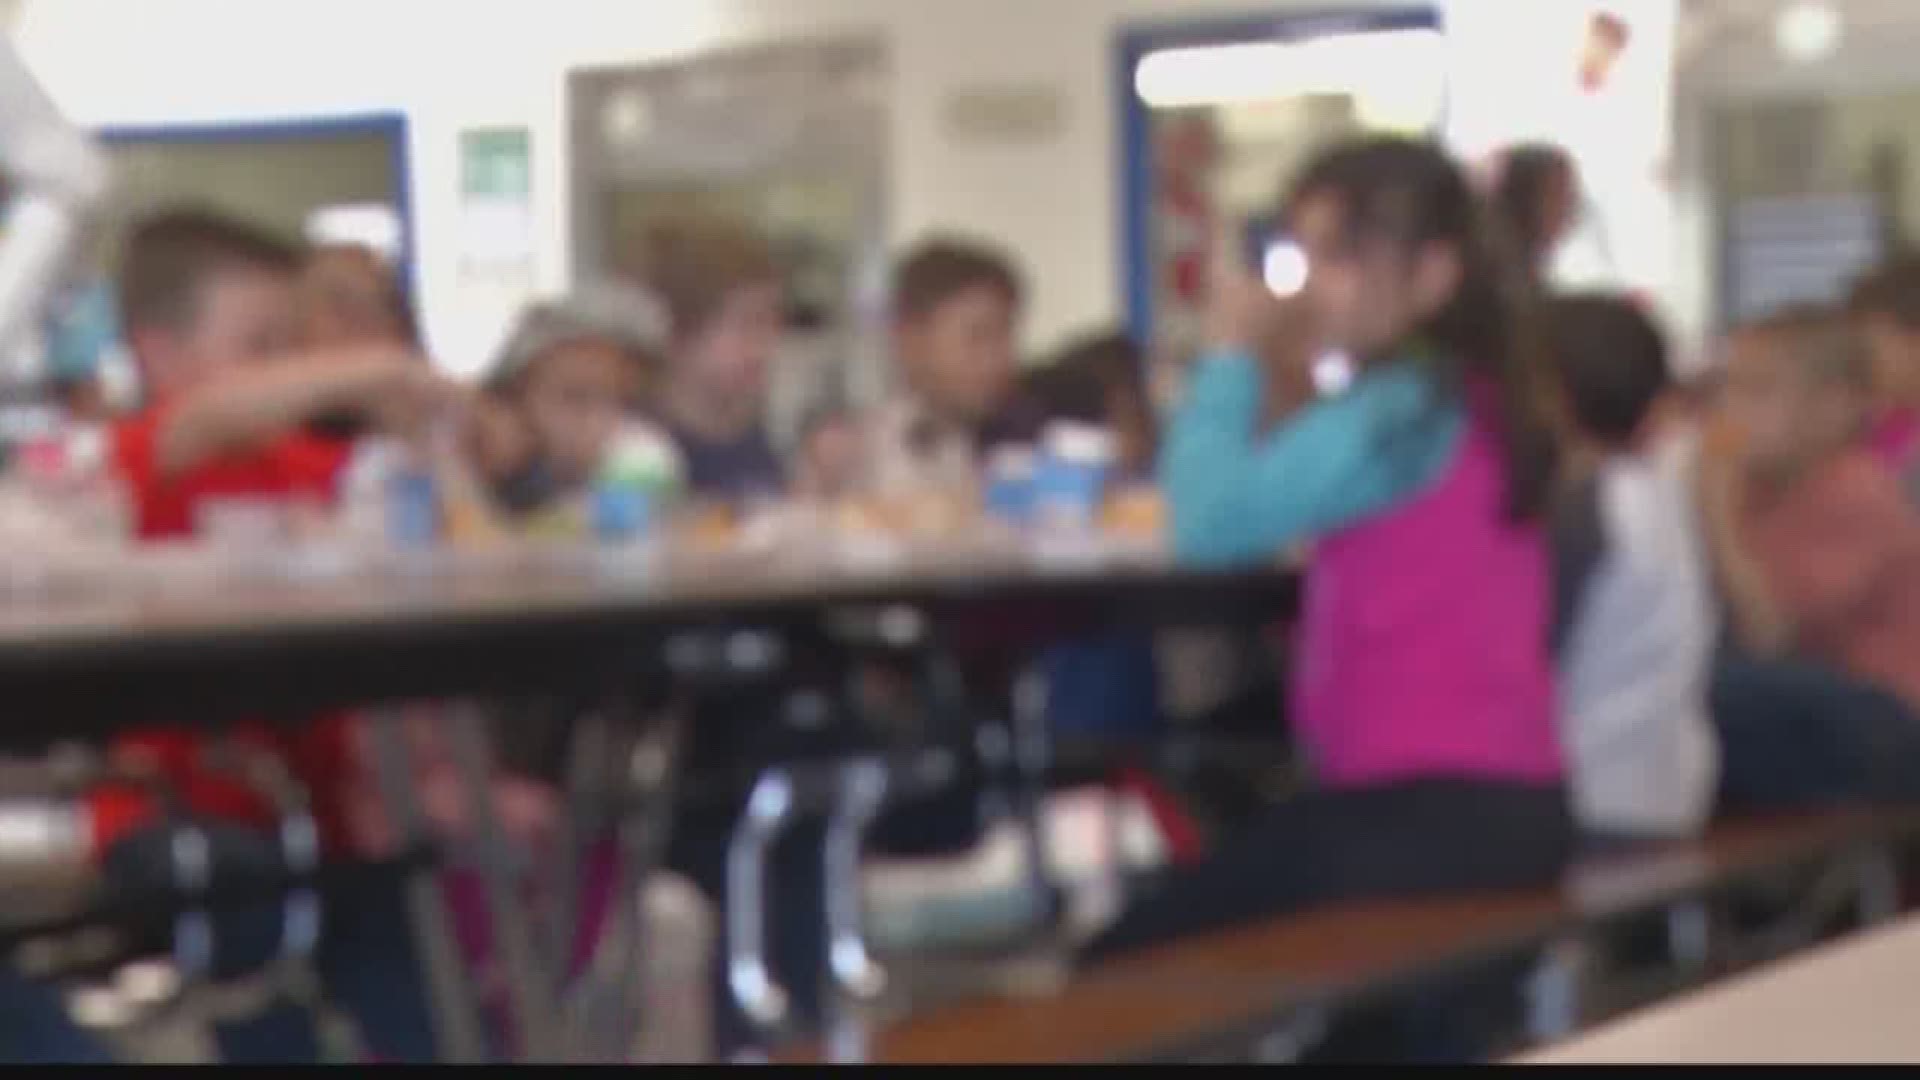 Elizabeth City's school lunch program is preparing for a financial hit if the shutdown continues.